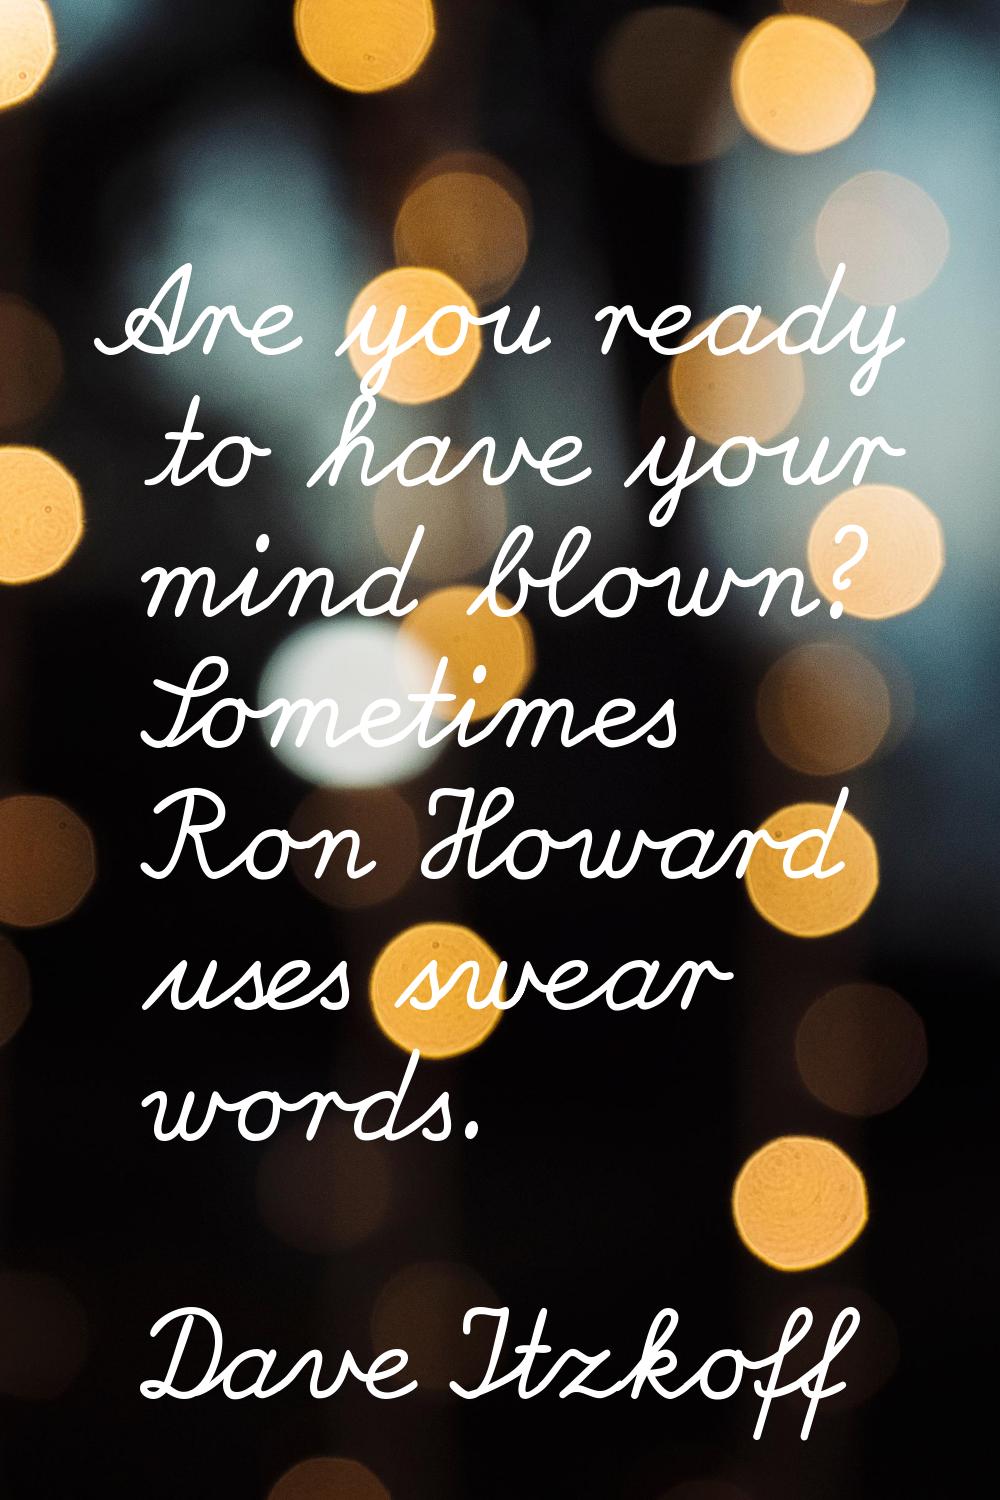 Are you ready to have your mind blown? Sometimes Ron Howard uses swear words.